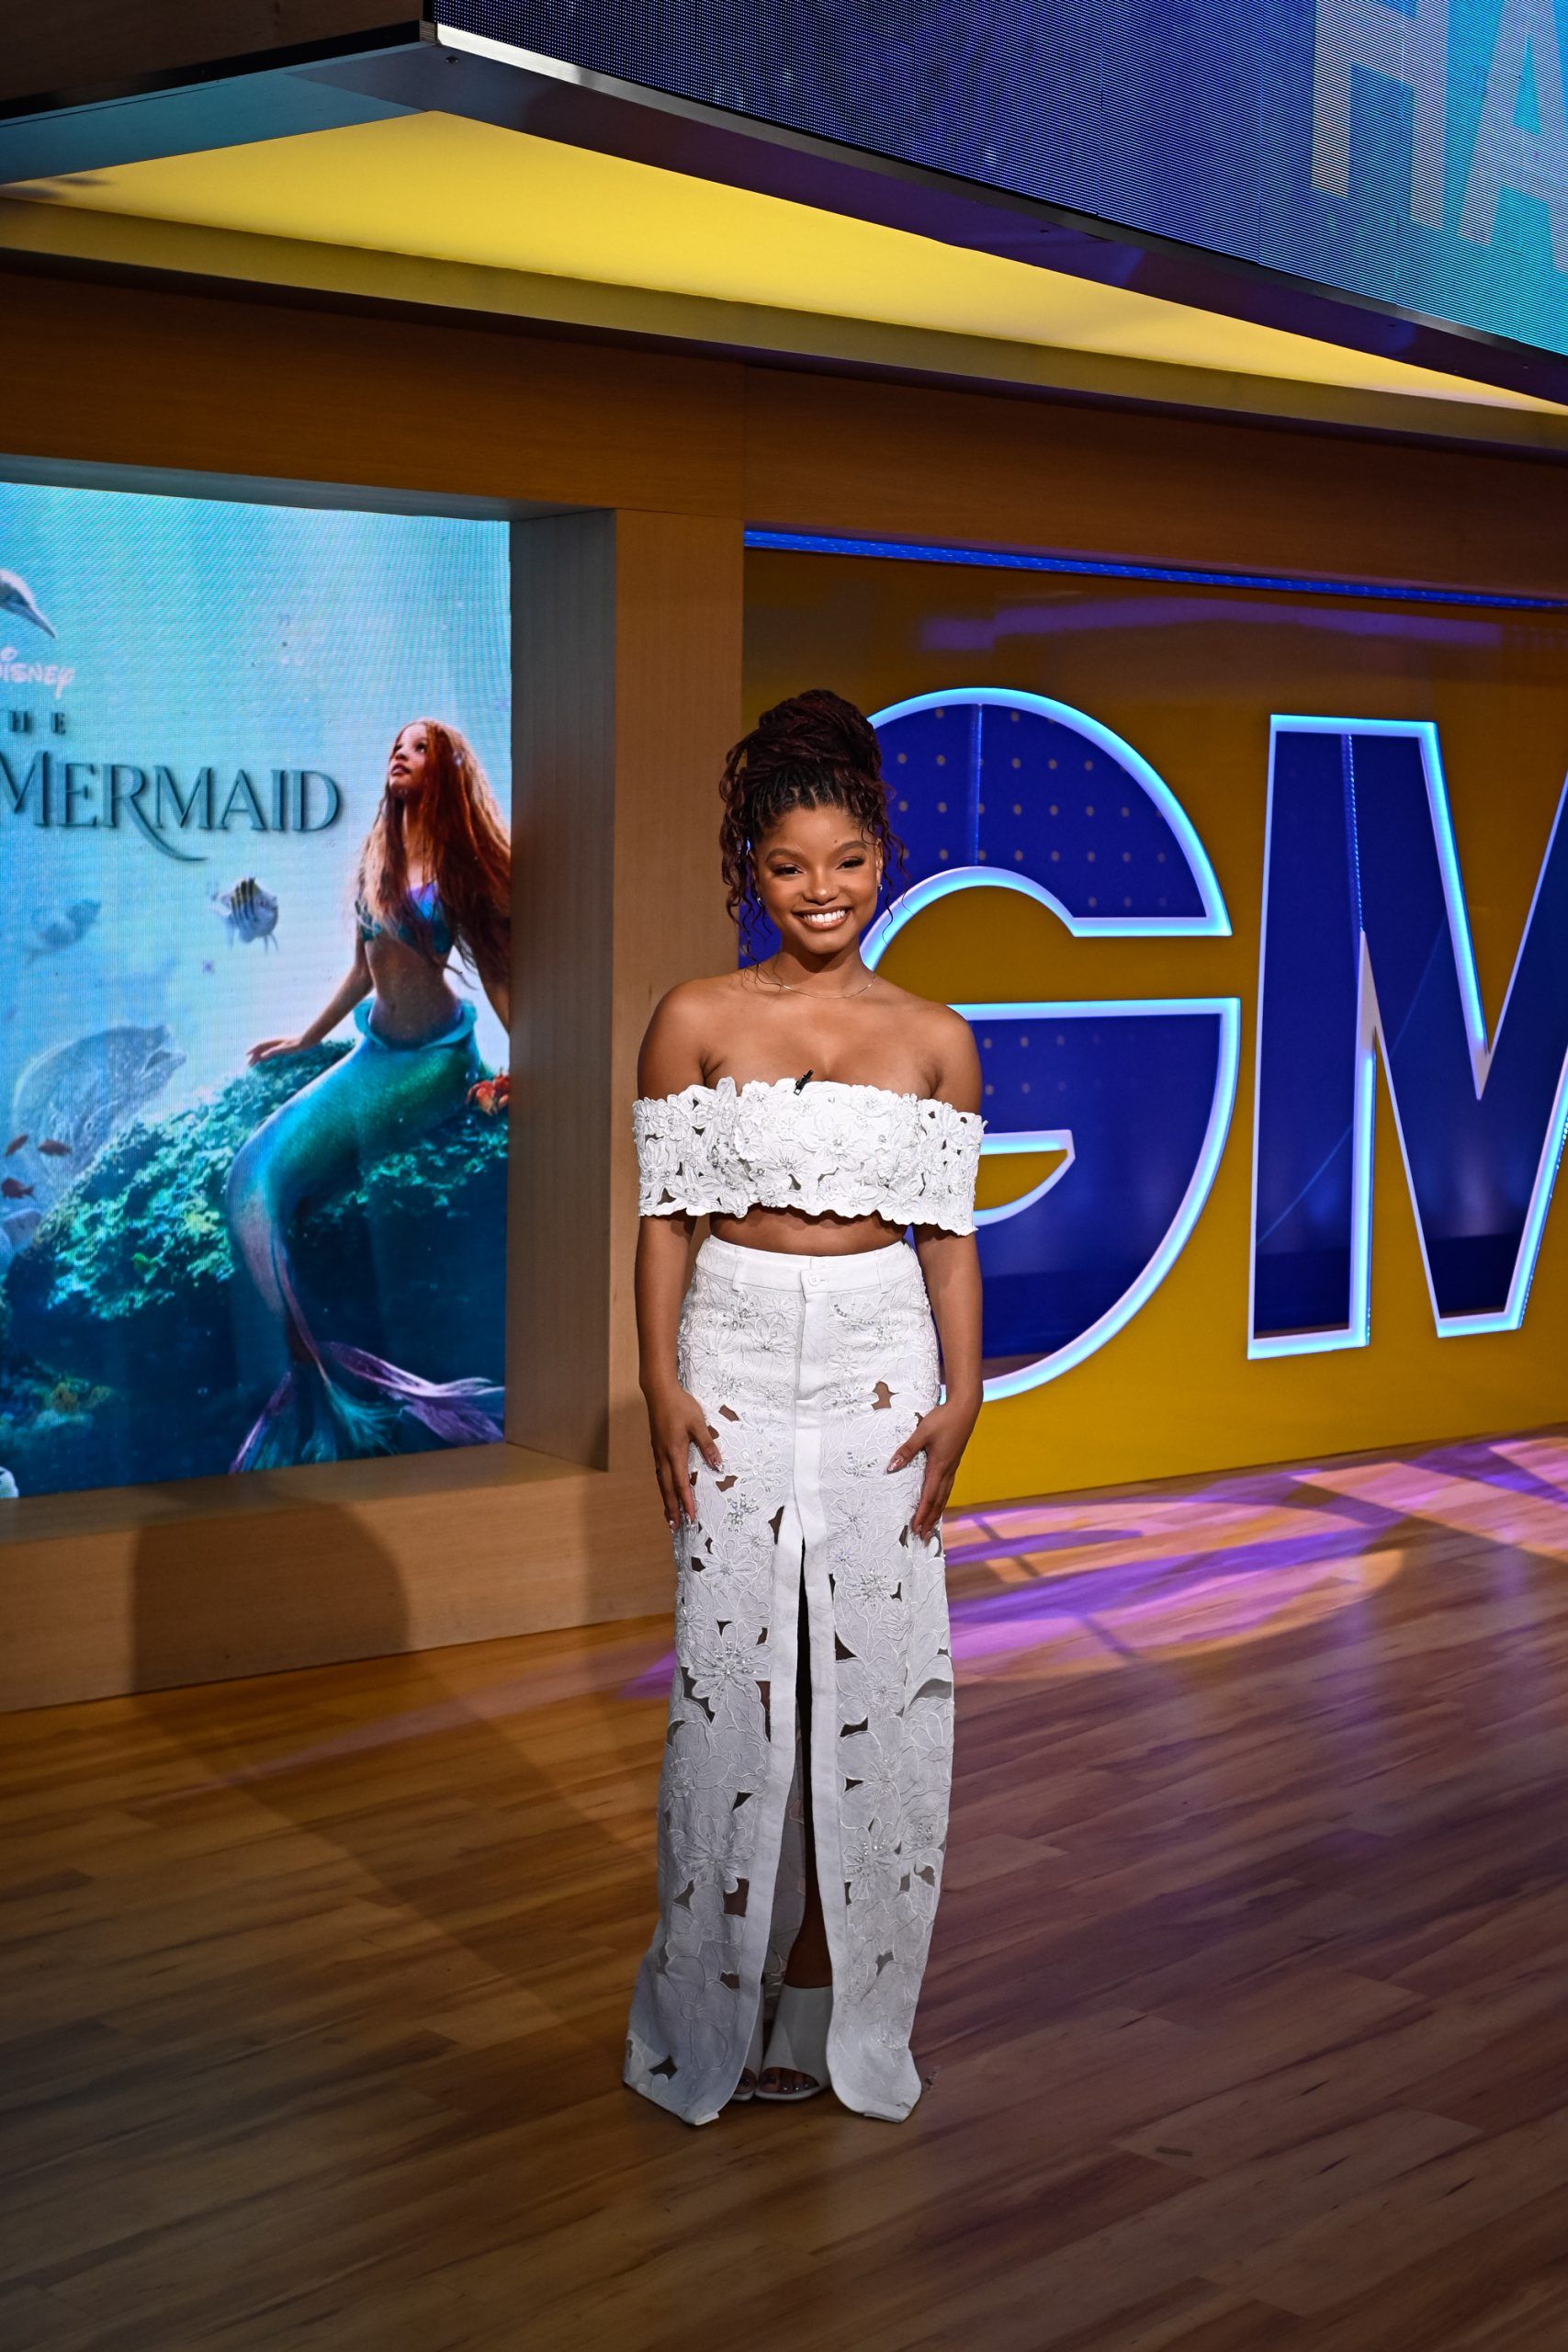 In Case You Missed It: Halle Bailey On ‘Good Morning America’